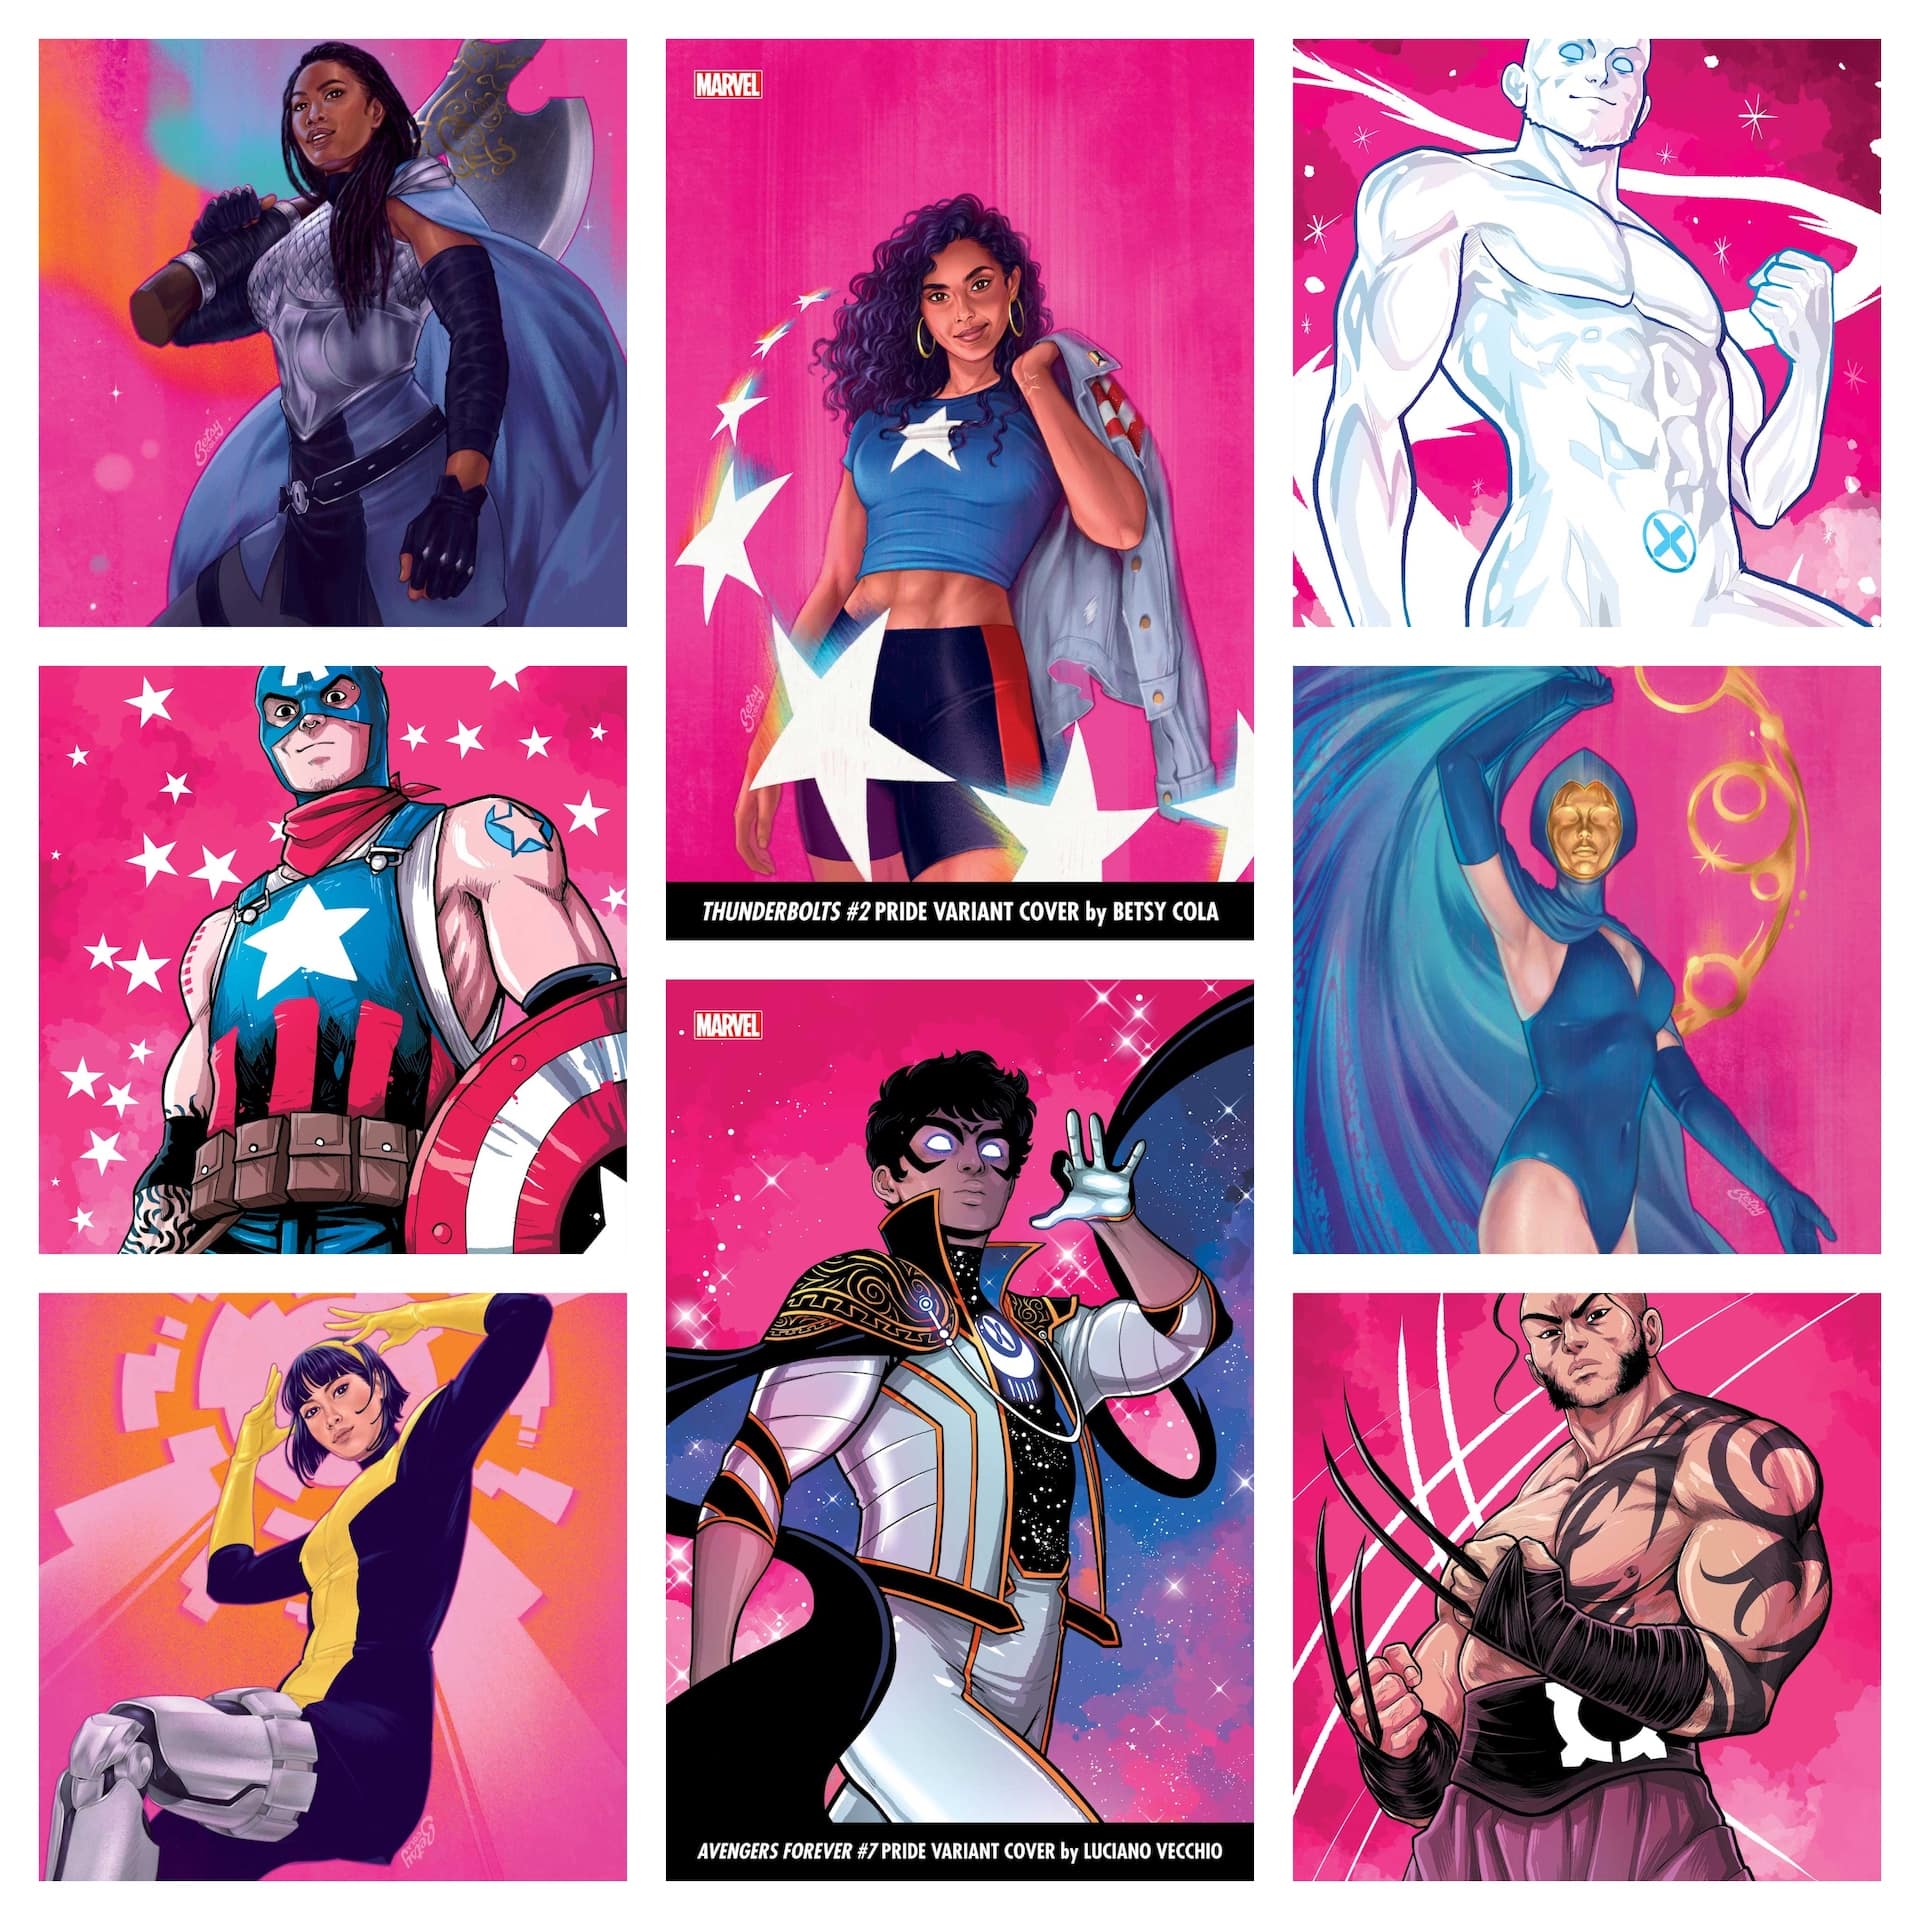 Marvel unveils Pride Month variant covers featuring X-Men, Thor, and more